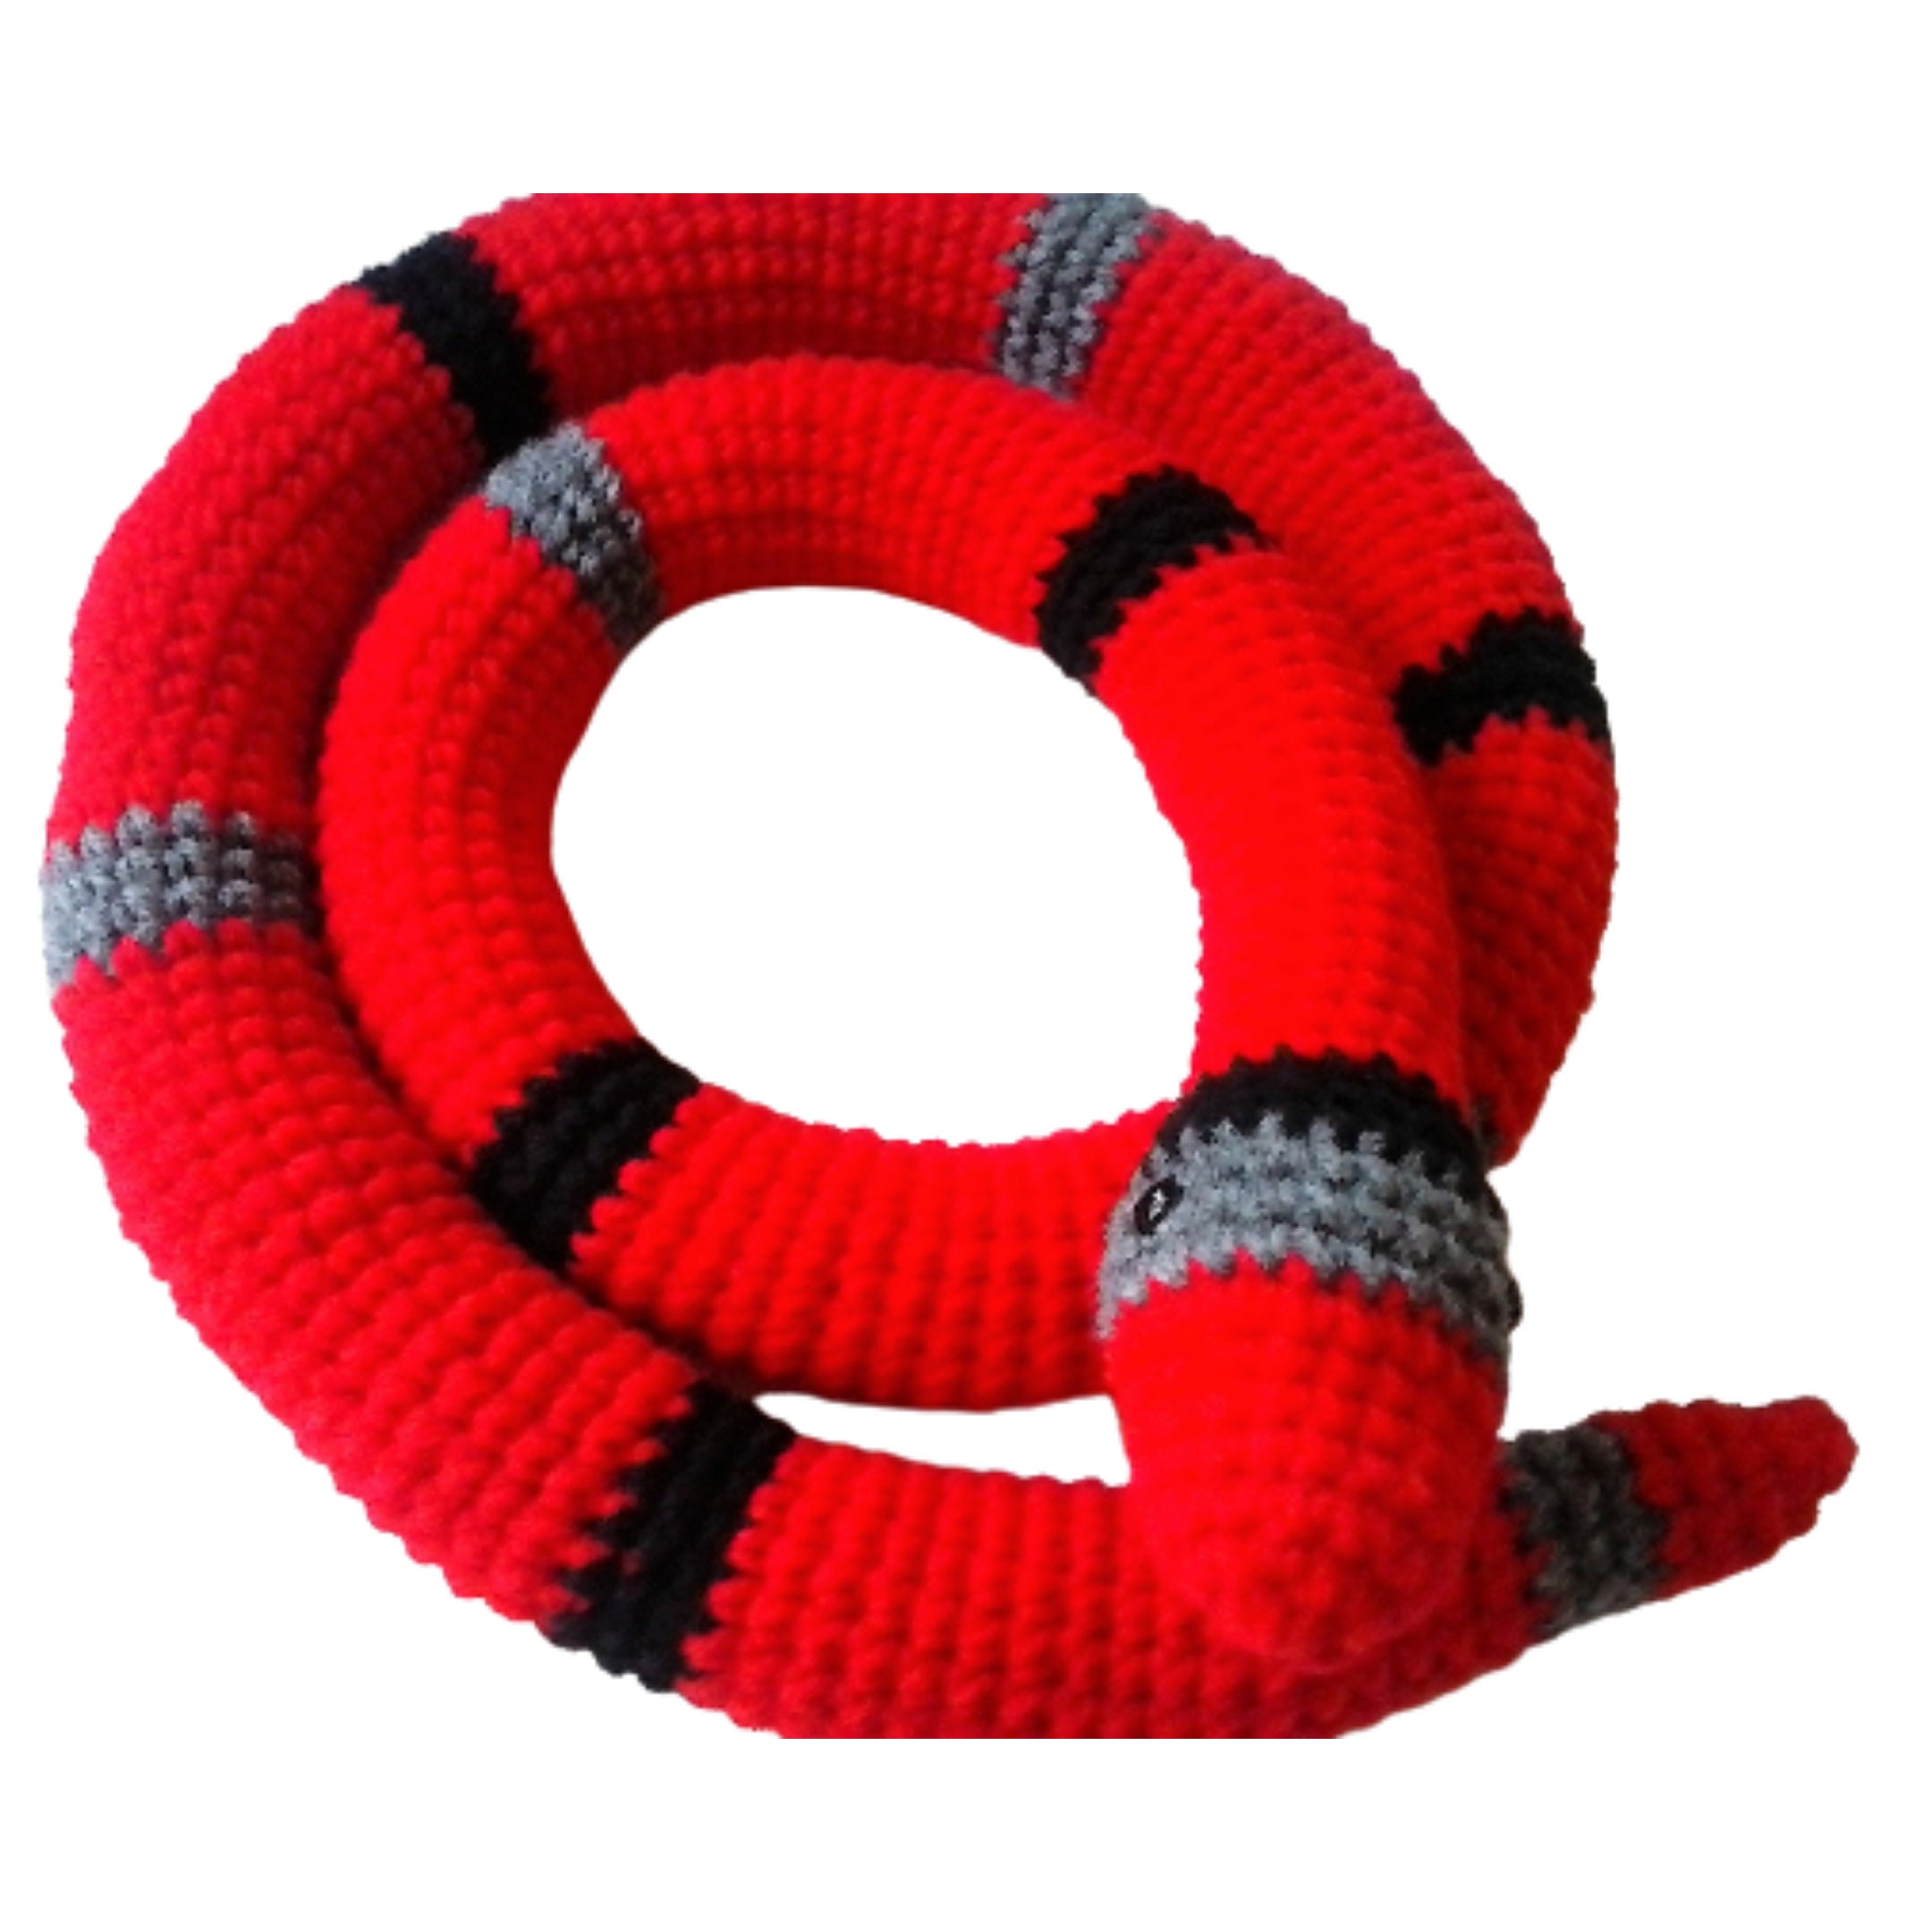 Black MADE TO ORDER 4 Foot Long Crochet Snake in Red and Gray